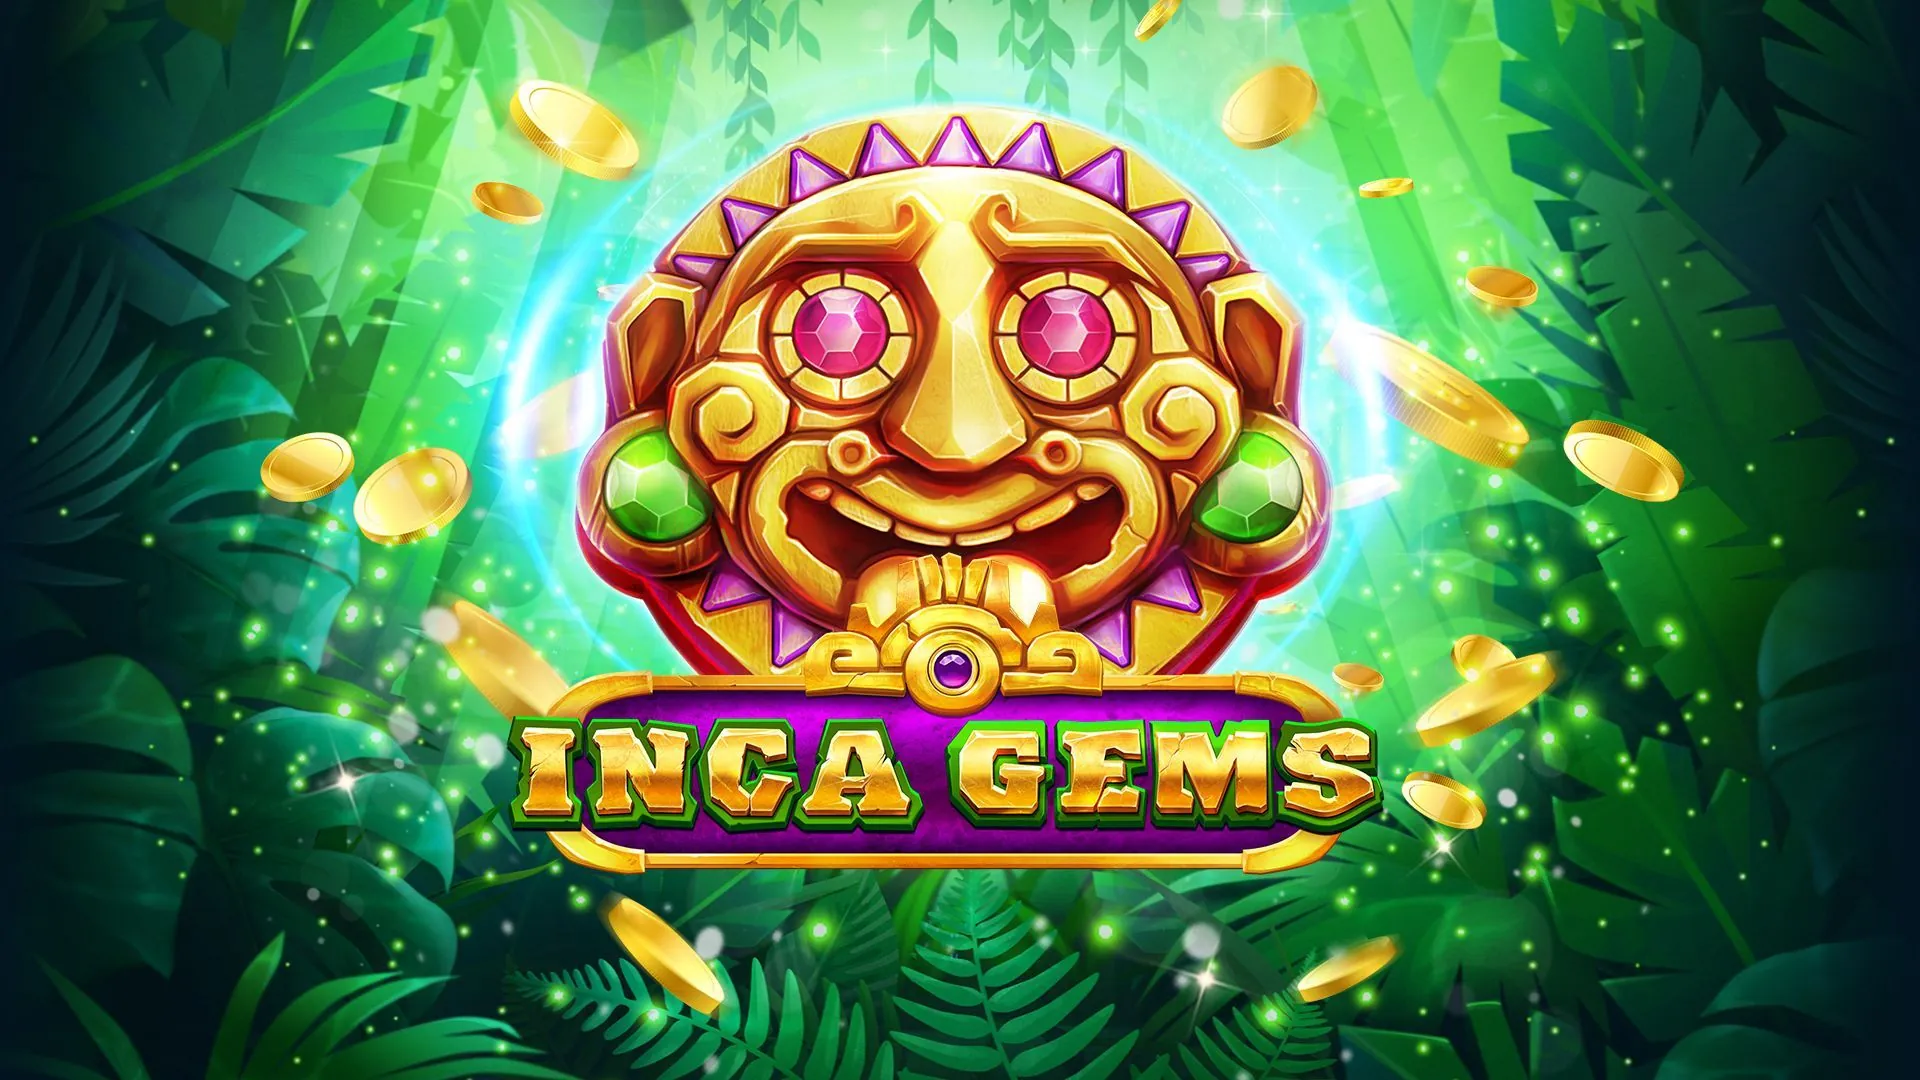 Inca Gems is out now